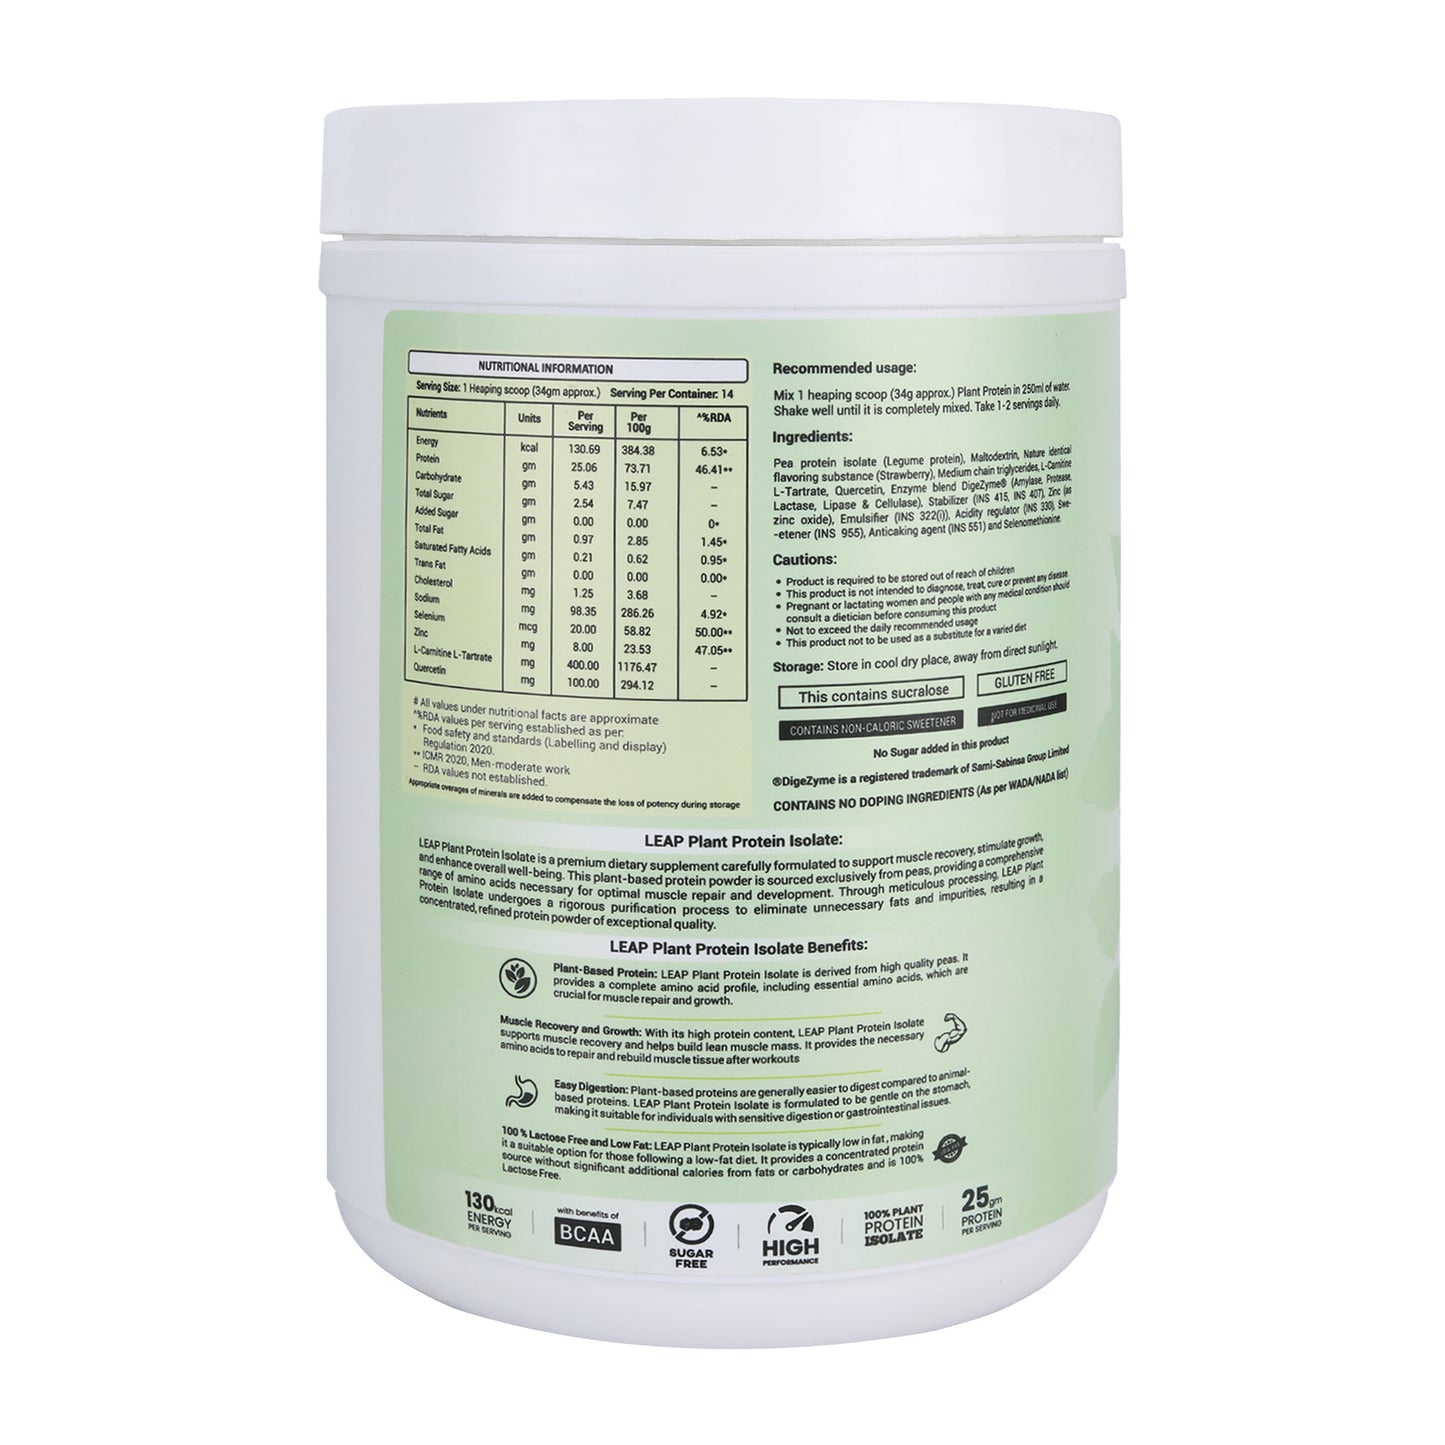 Leap Plant Protein Isolate (Mango) - 500gm